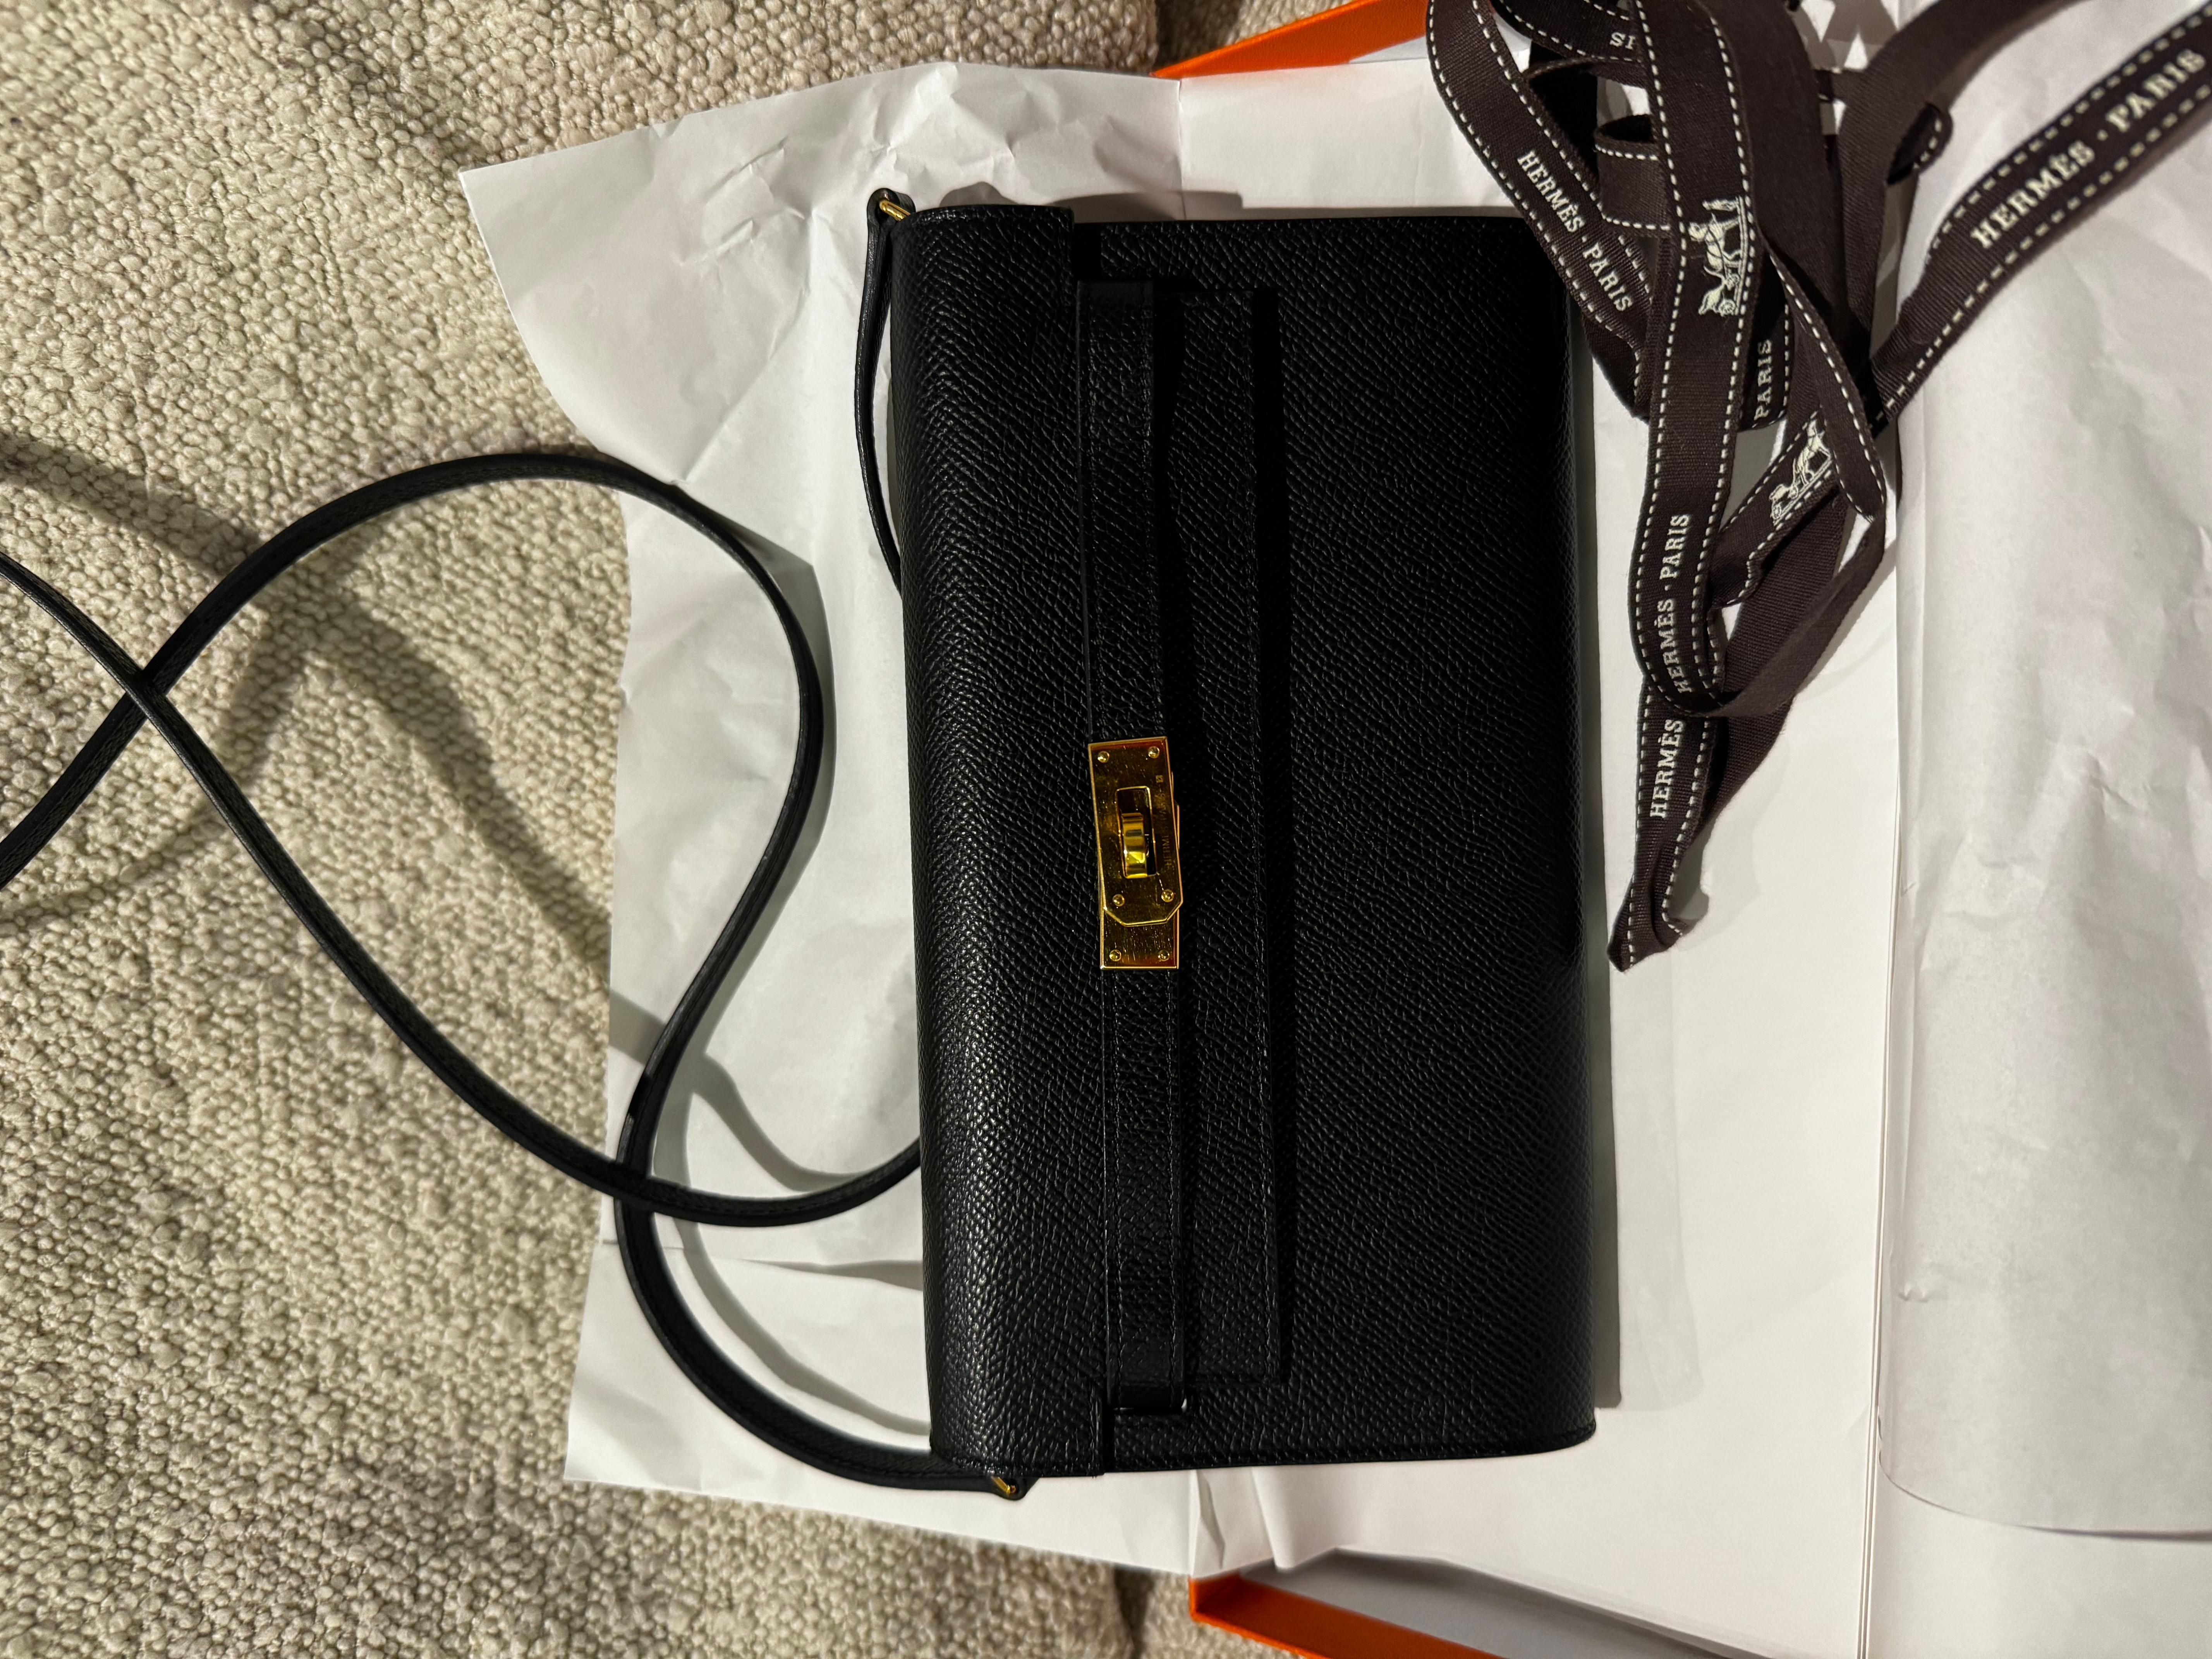 Hermes kelly to go in black epsom with gold hardware with long strap to wear it crossbody. It can be used as a clutch bag or crossbody. Very practical and chic. Used few times, few signs in the hardware. Overall In very good condition.
With box and